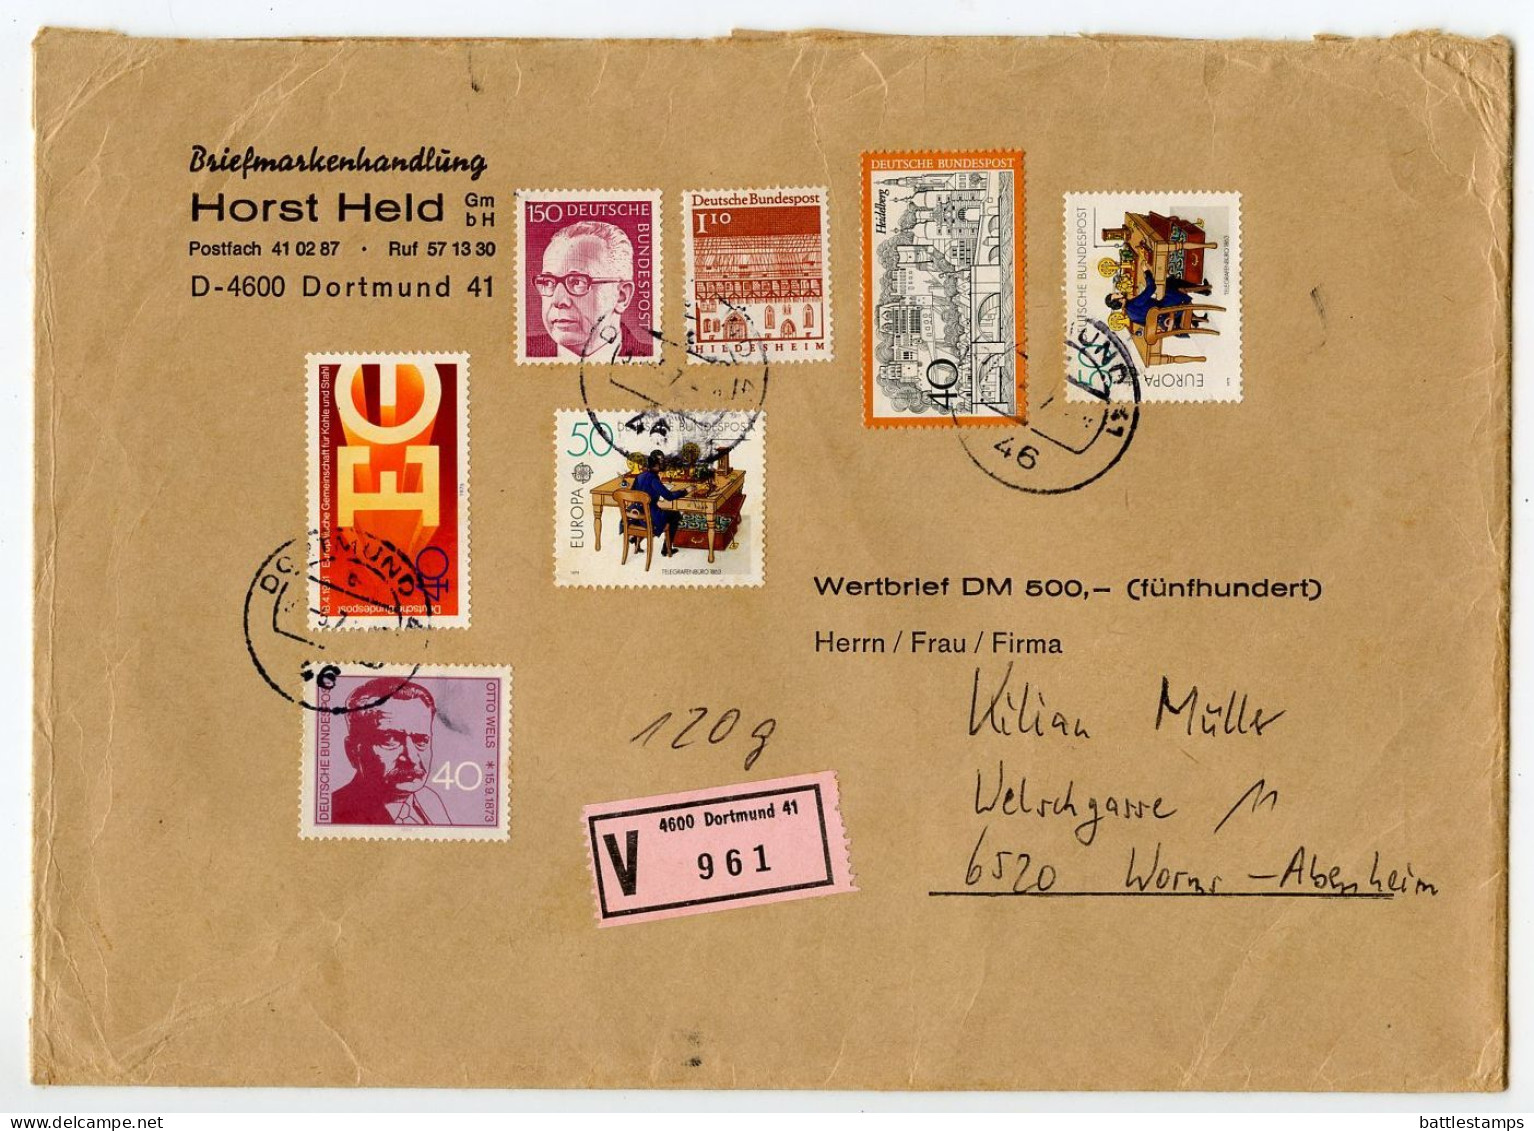 Germany, West 1979 Insured V-Label Cover; Dortmund To Worms-Abenheim; Mix Of Stamps - Lettres & Documents